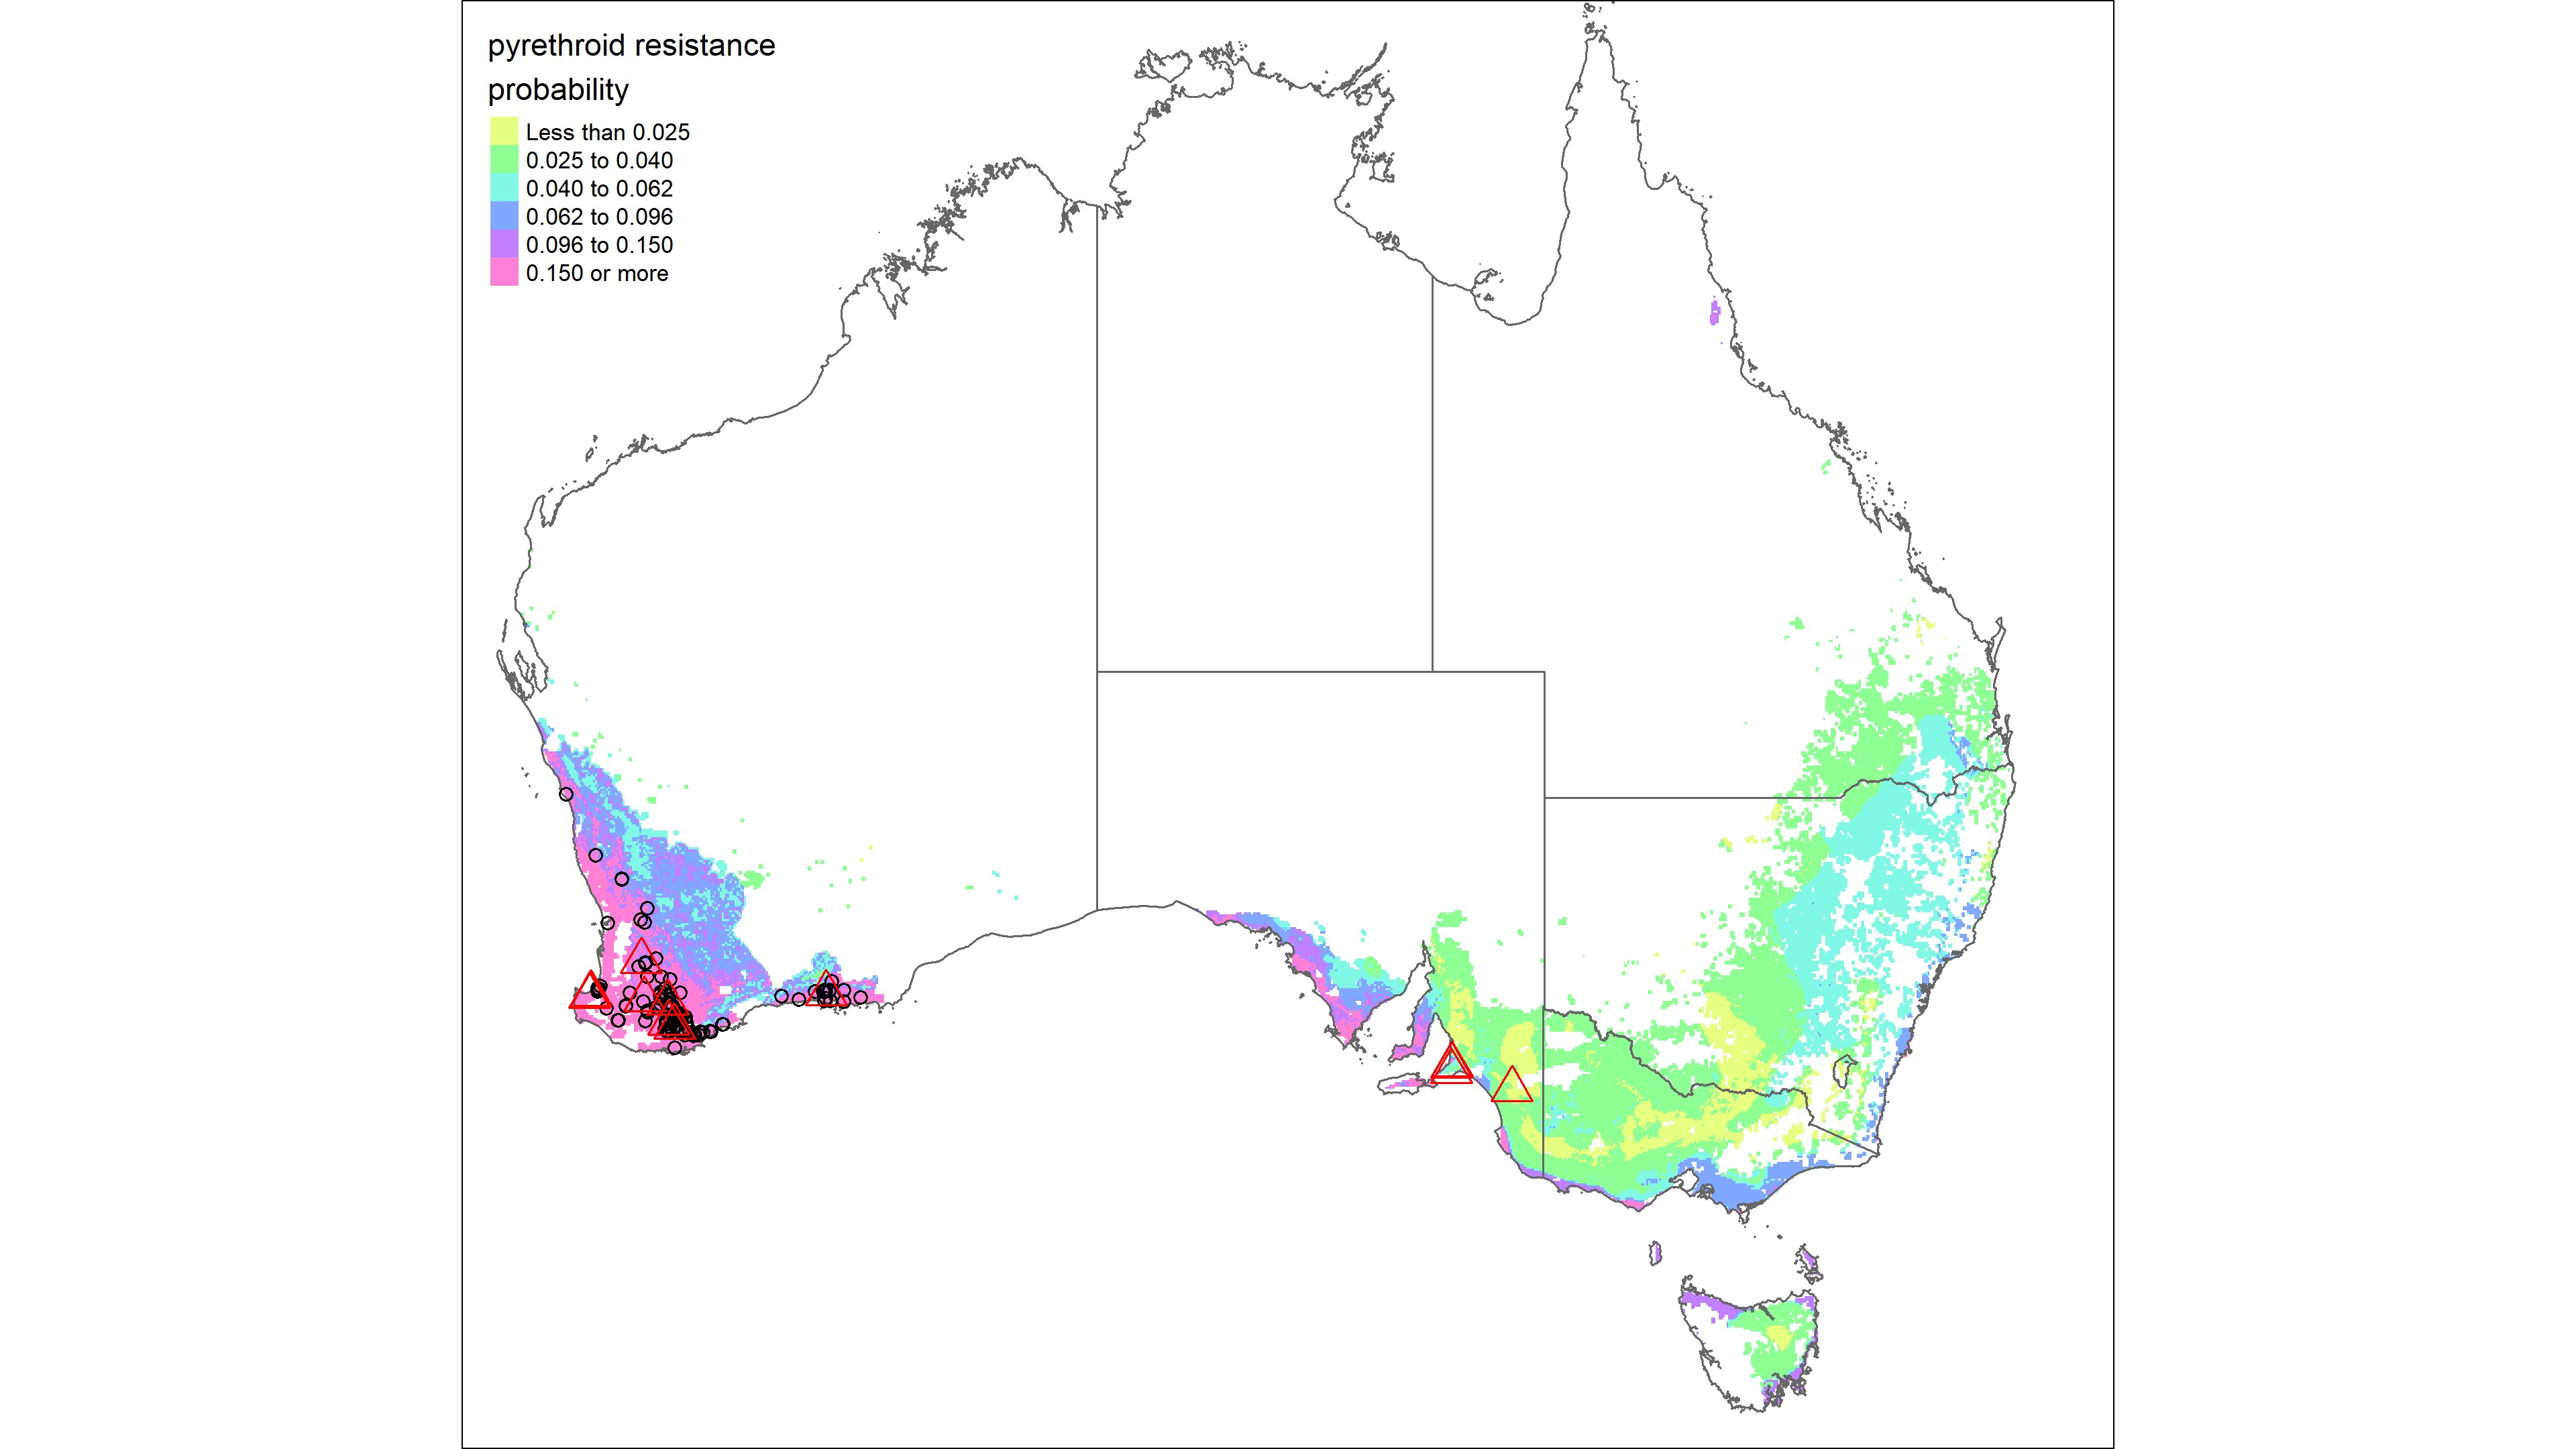 Resistance in RLEM is related to chemical pressure (average number of chemicals used annually), and is also more likely to develop in regions with particular climatic properties. The study highlighted risks in eastern Australia before the recent detection of resistance in SA, and will be used to guide resistance management in the future.